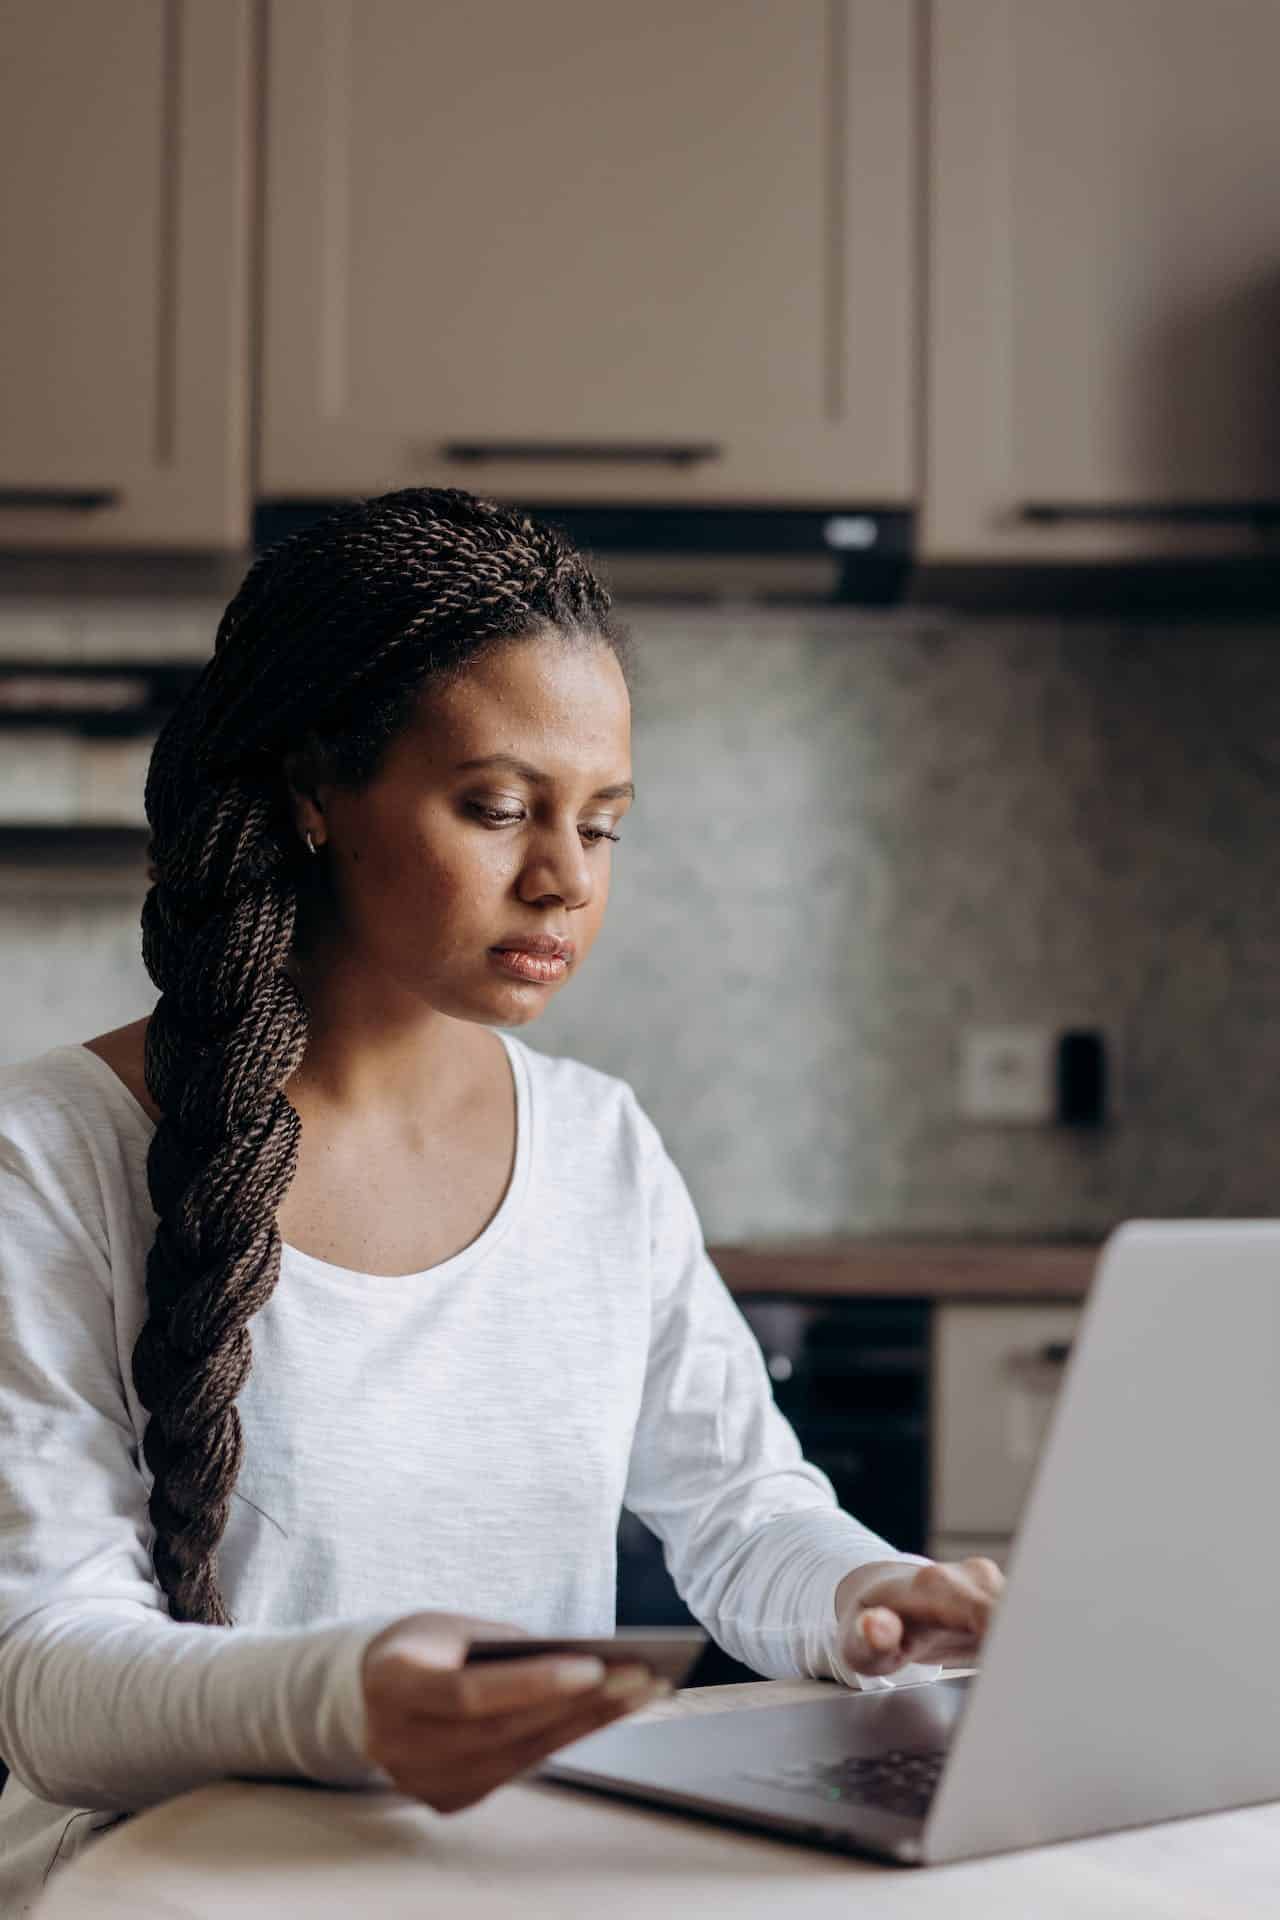 Black woman with braids pulled back sits at a laptop, with a card in her hand, as though she is checking her insurance benefits on her computer.